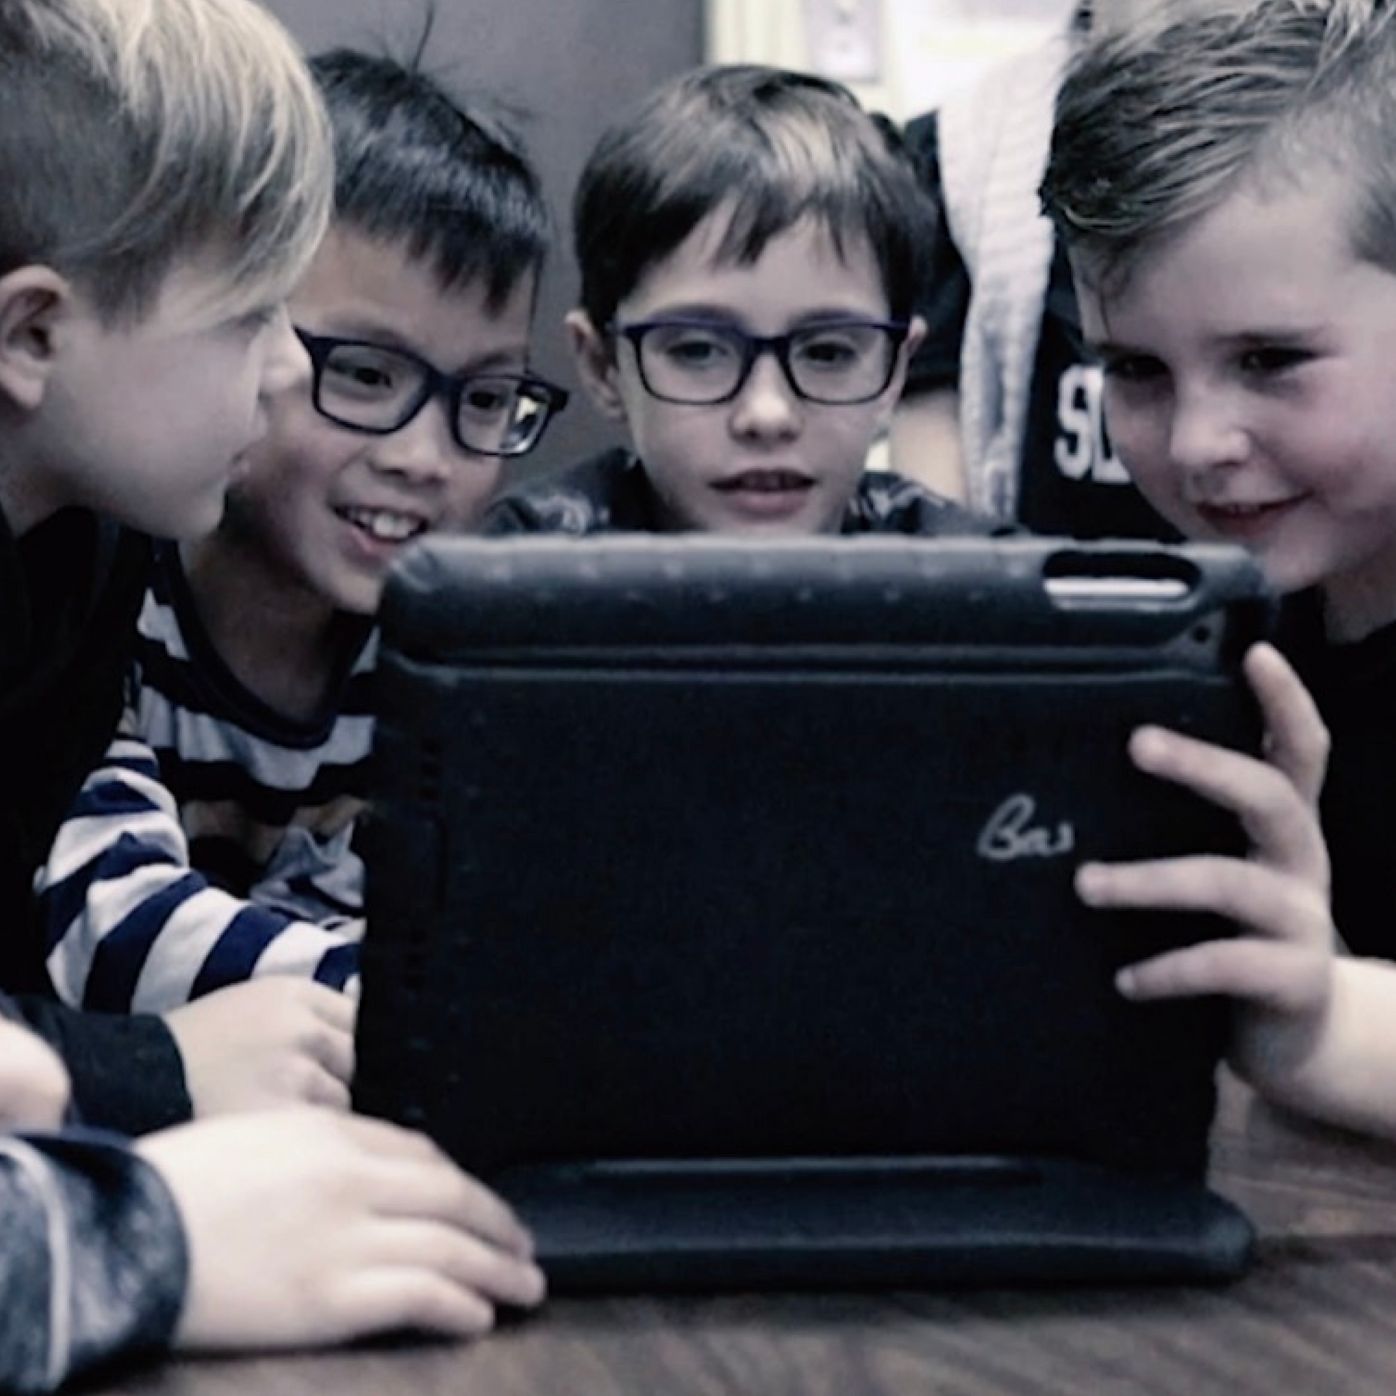 Children at school viewing content on a tablet